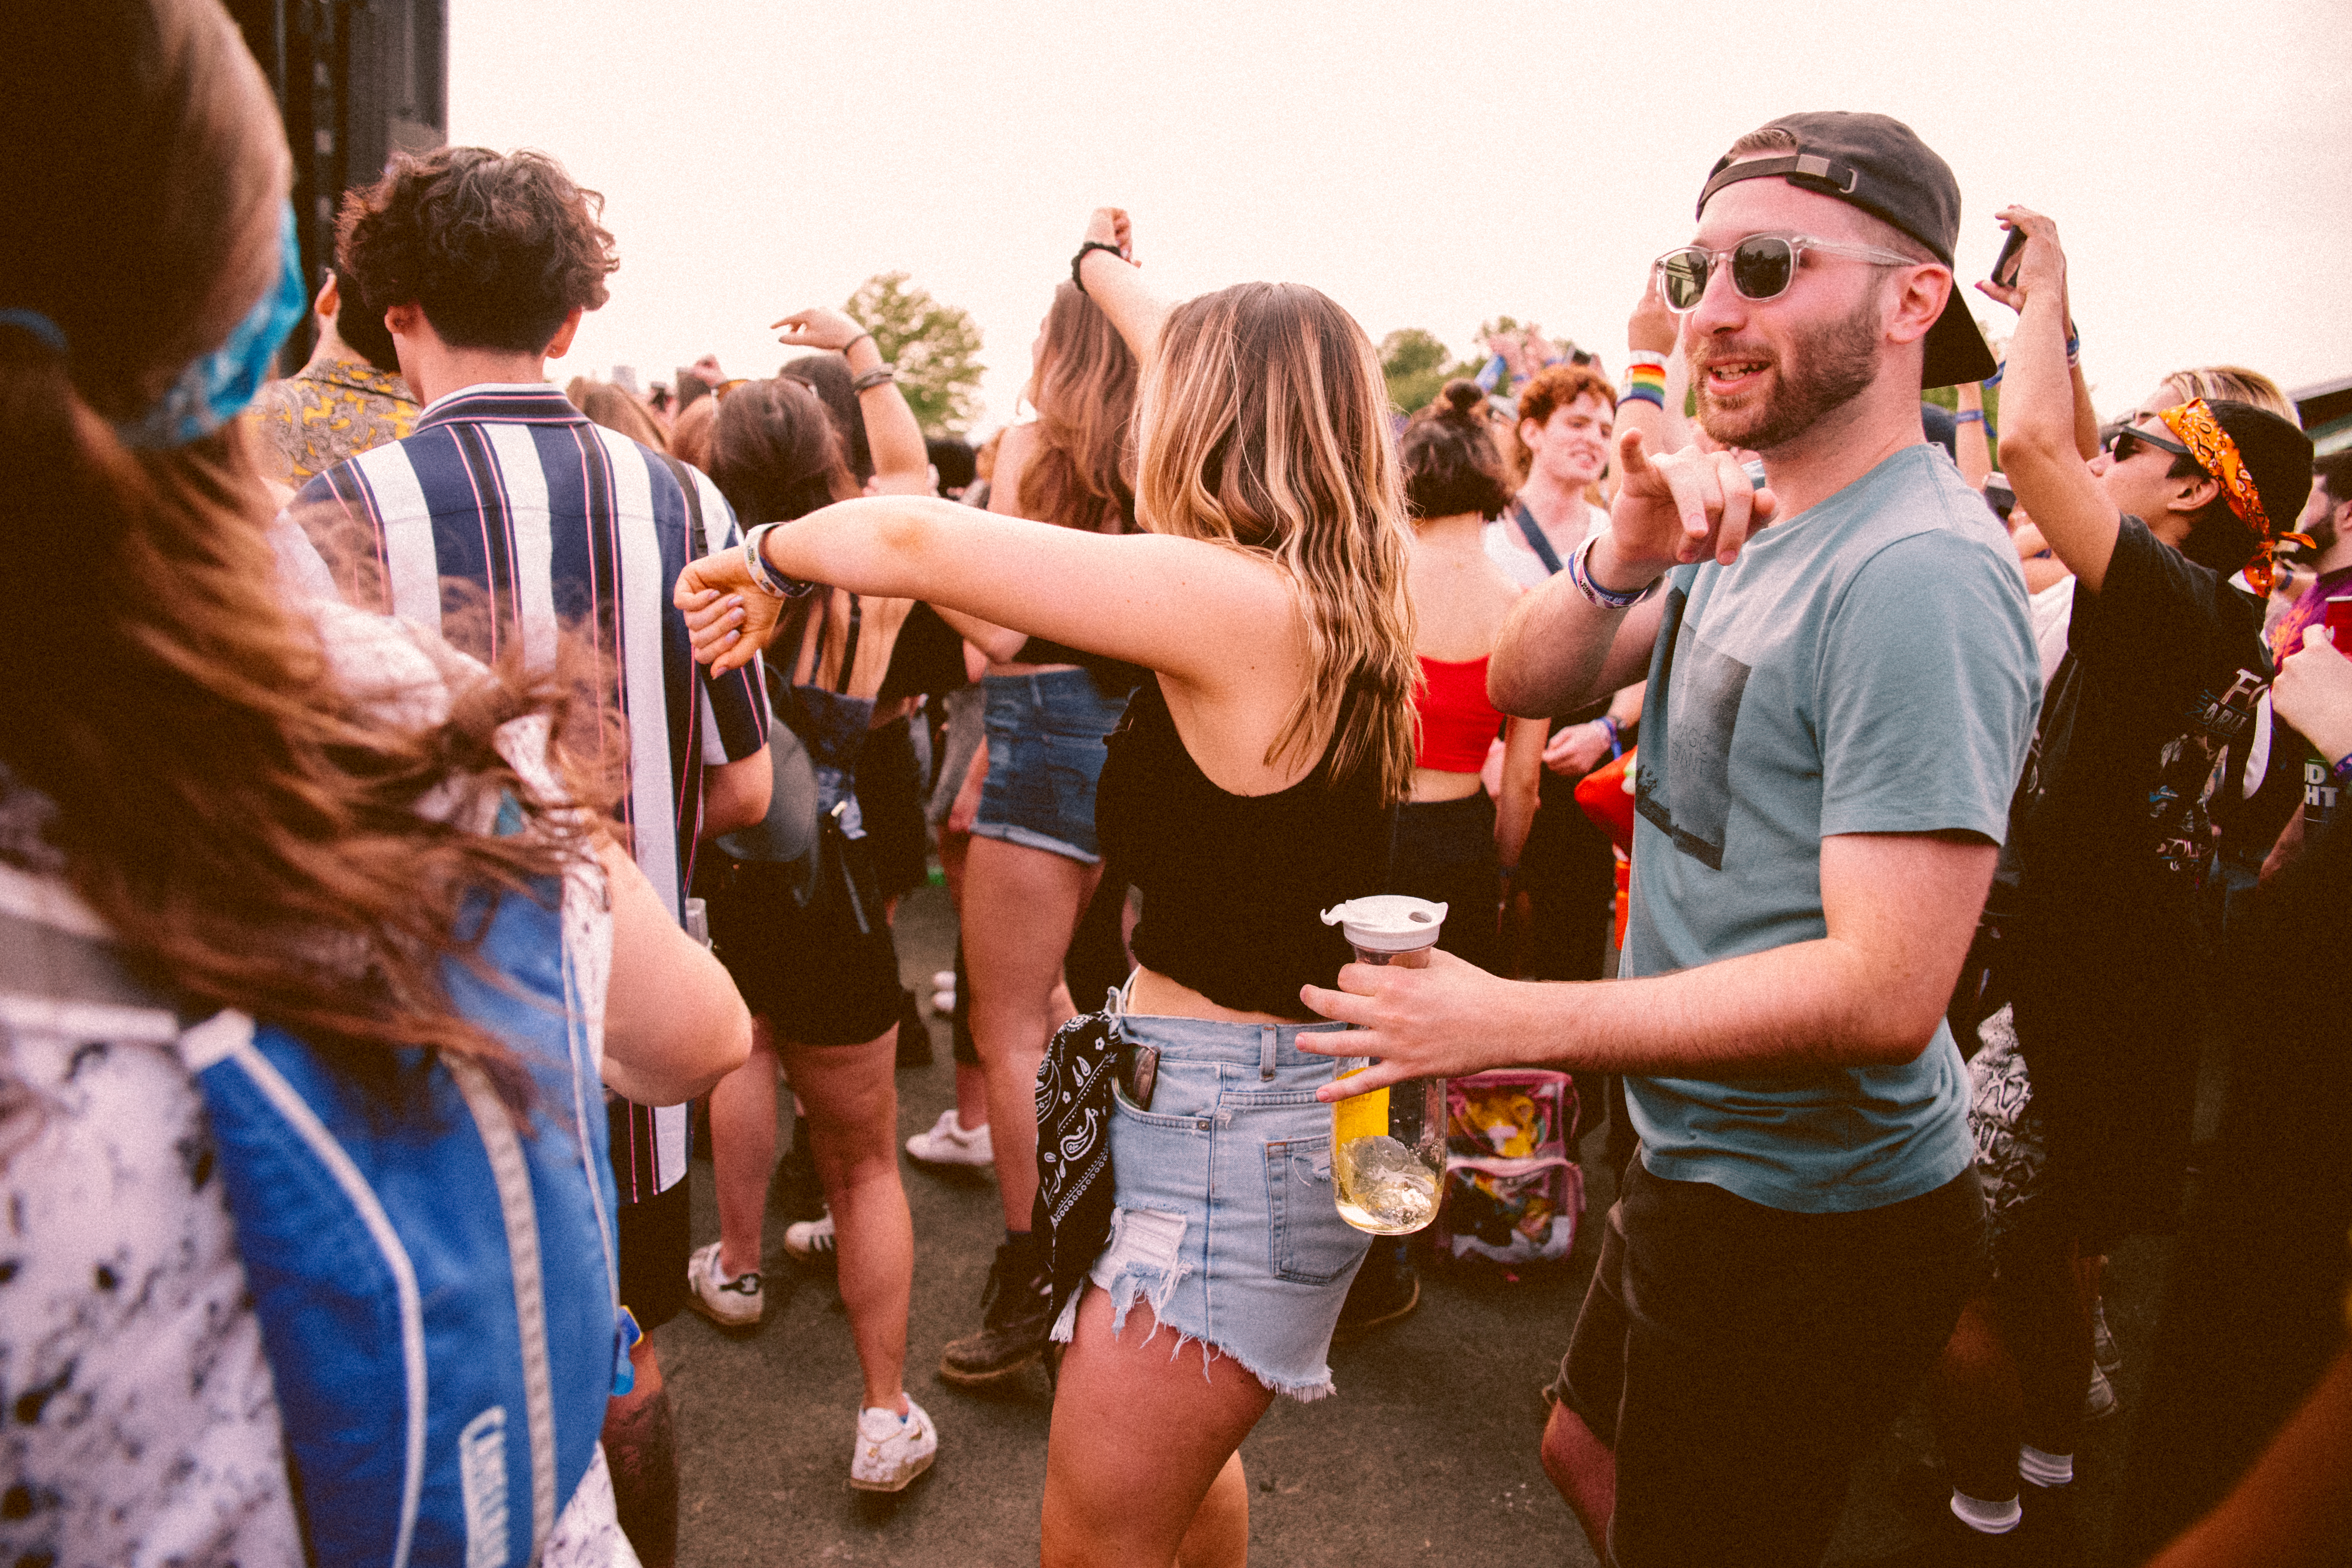 PHOTOS: Behind-the-Scenes of Governors Ball 2019